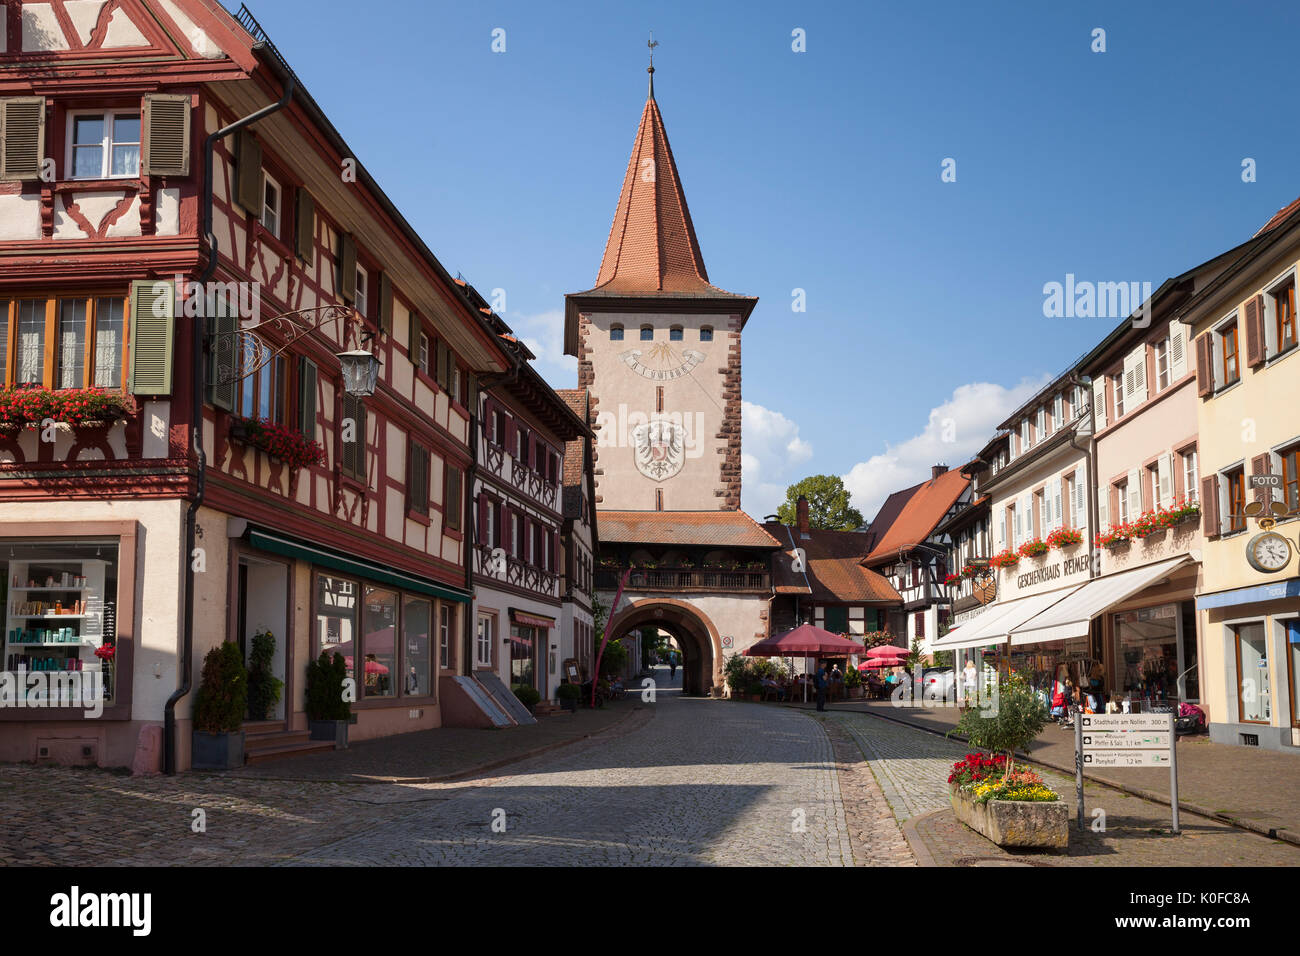 City of Gengenbach, Black forest, Baden-Württemberg, Germany, Europe Stock Photo